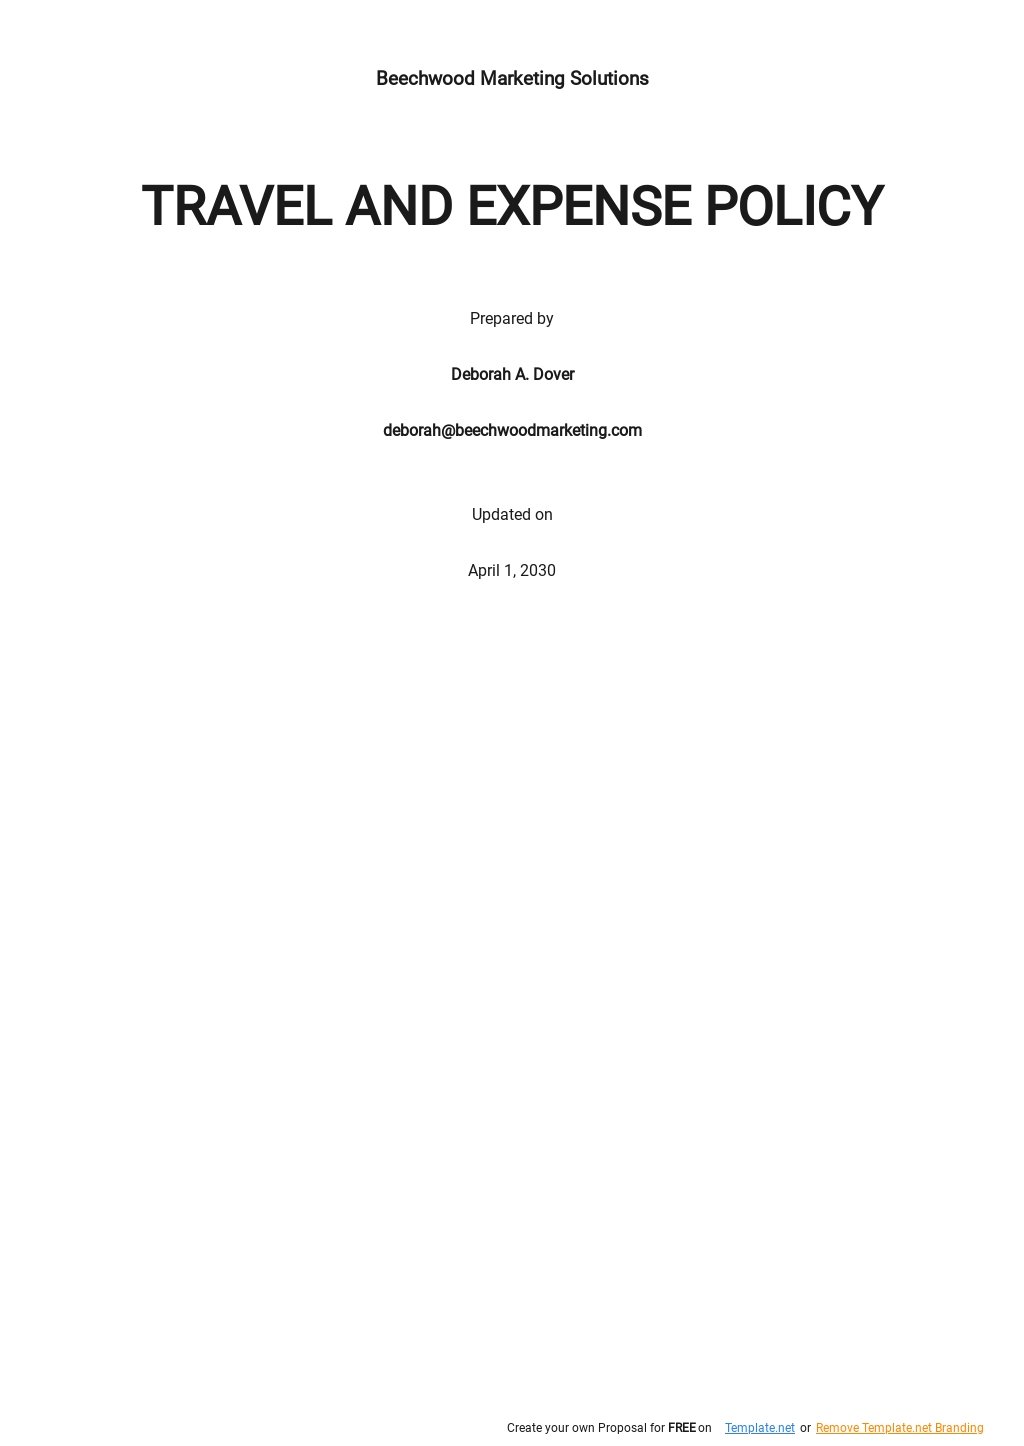 Travel and Expense Policy Template.jpe